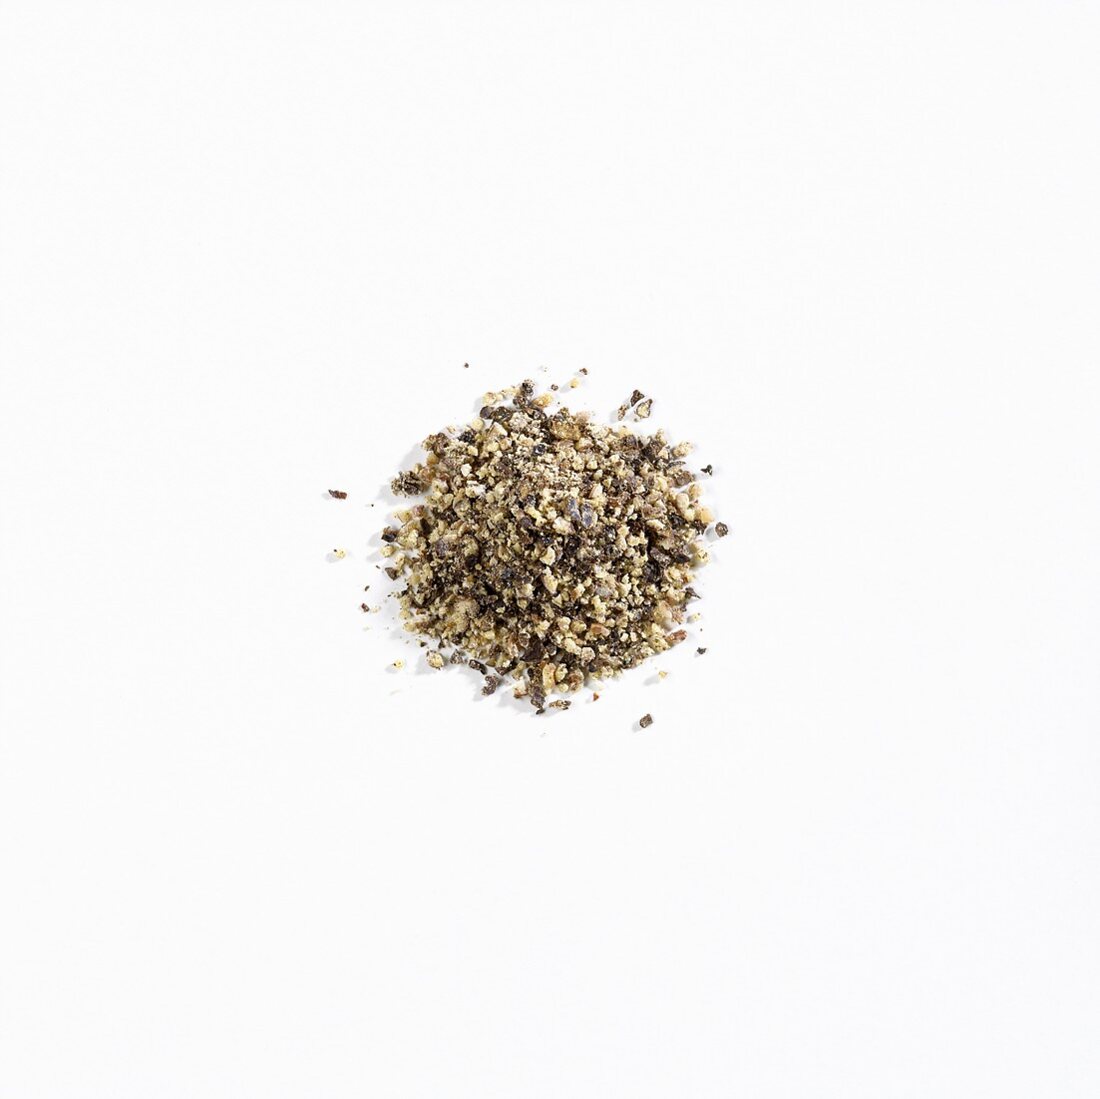 Roughly ground pepper